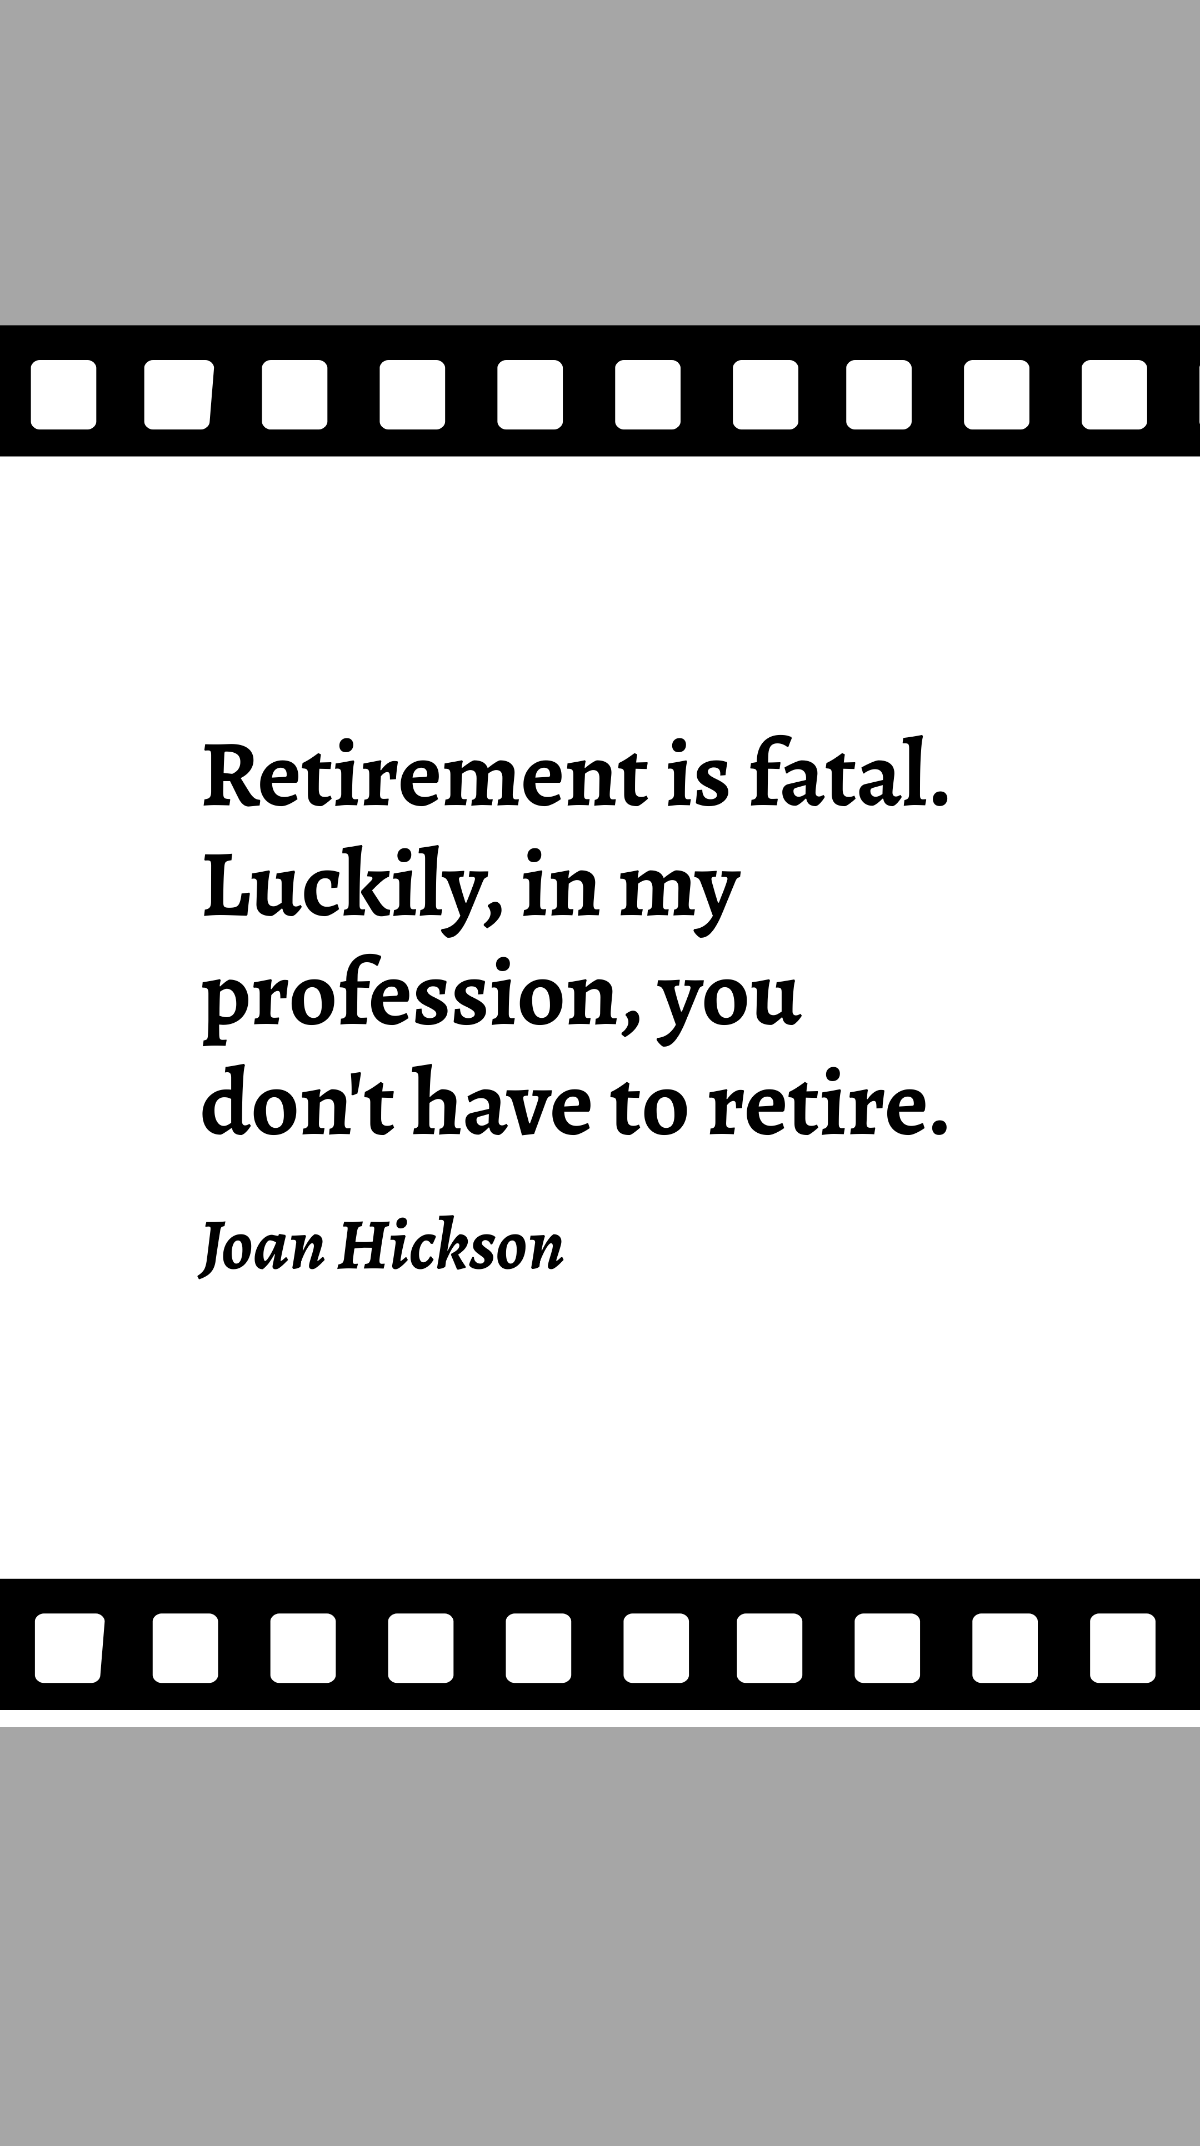 Joan Hickson - Retirement is fatal. Luckily, in my profession, you don't have to retire. Template